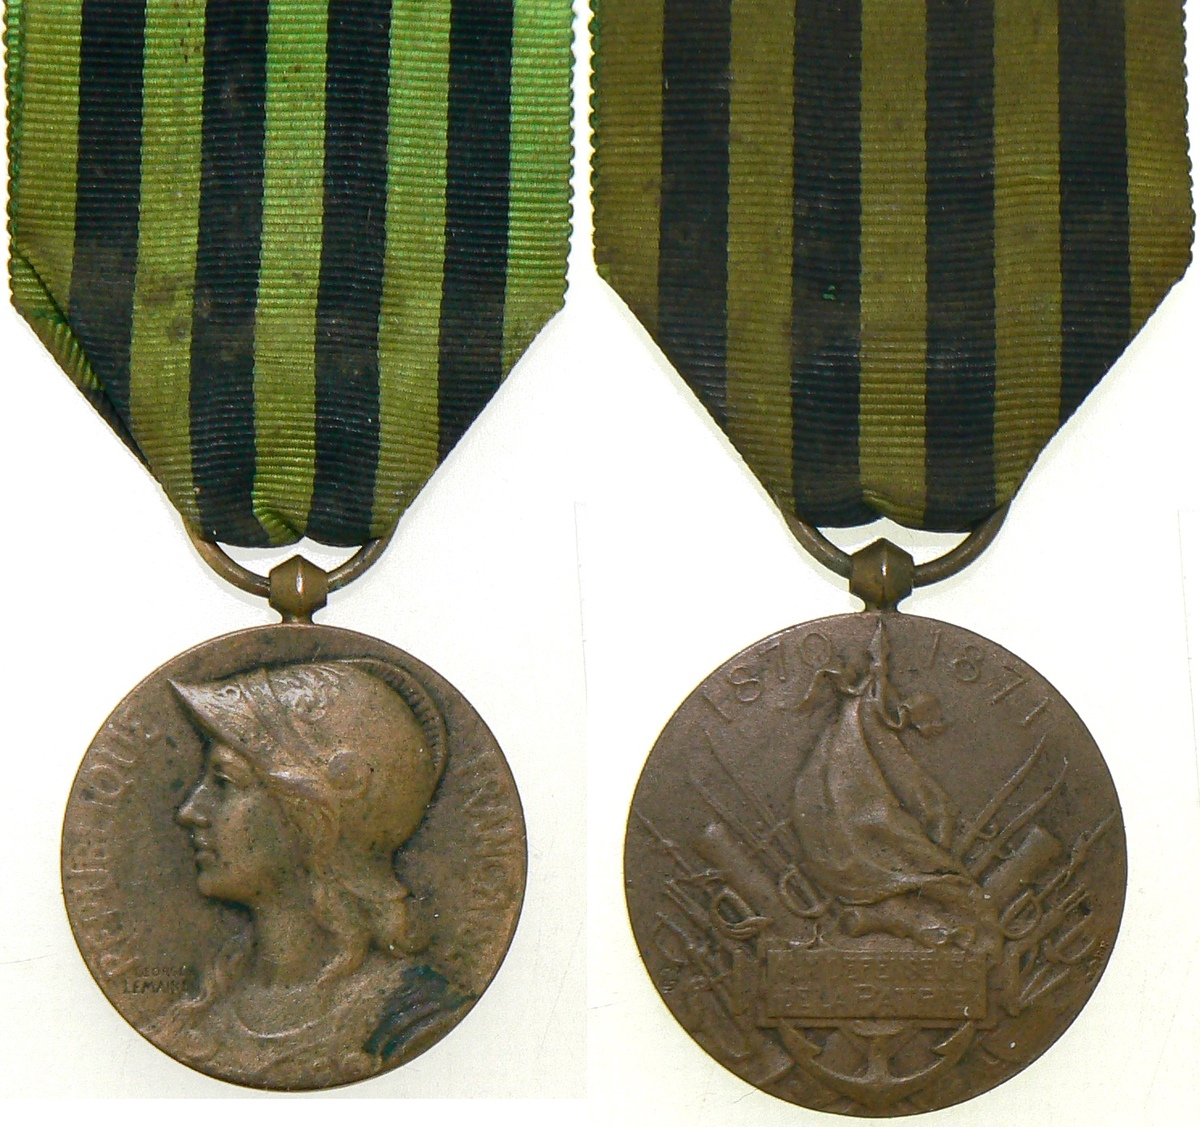 Commemorative Medal for the 1870-71, Franco-Prussian War